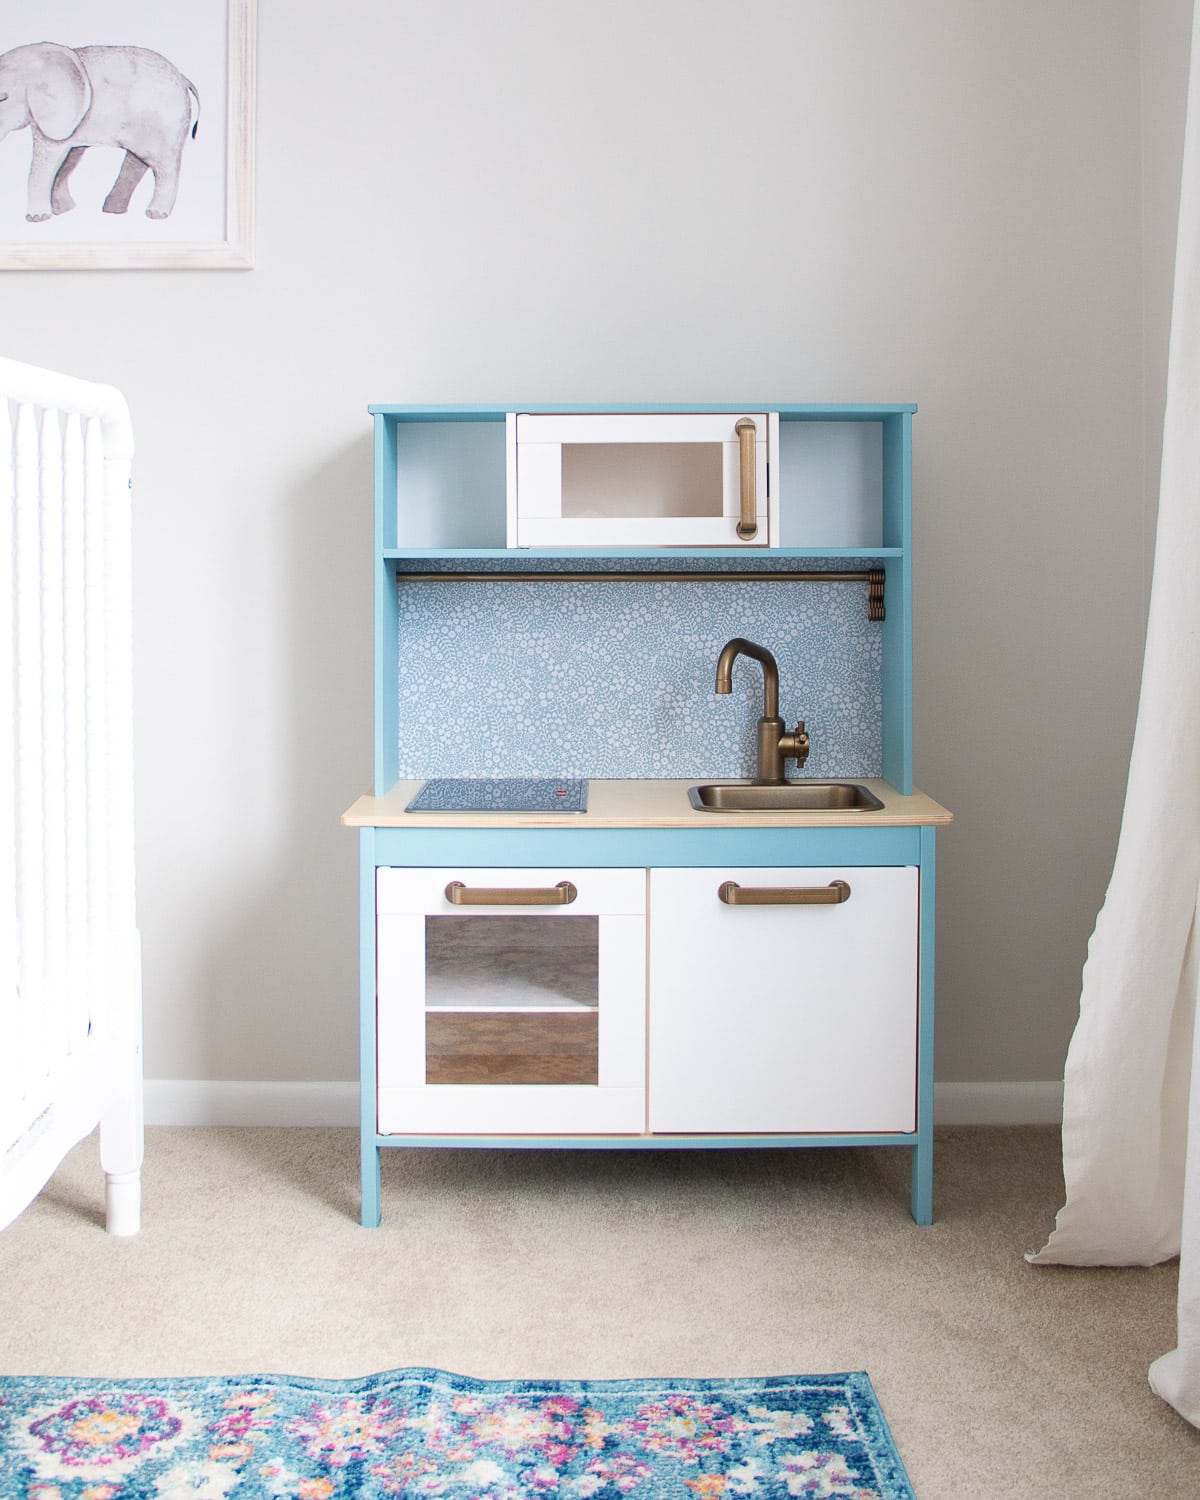 Ikea Play Kitchen Hack Tutorial + What You Should Know Before You Start!